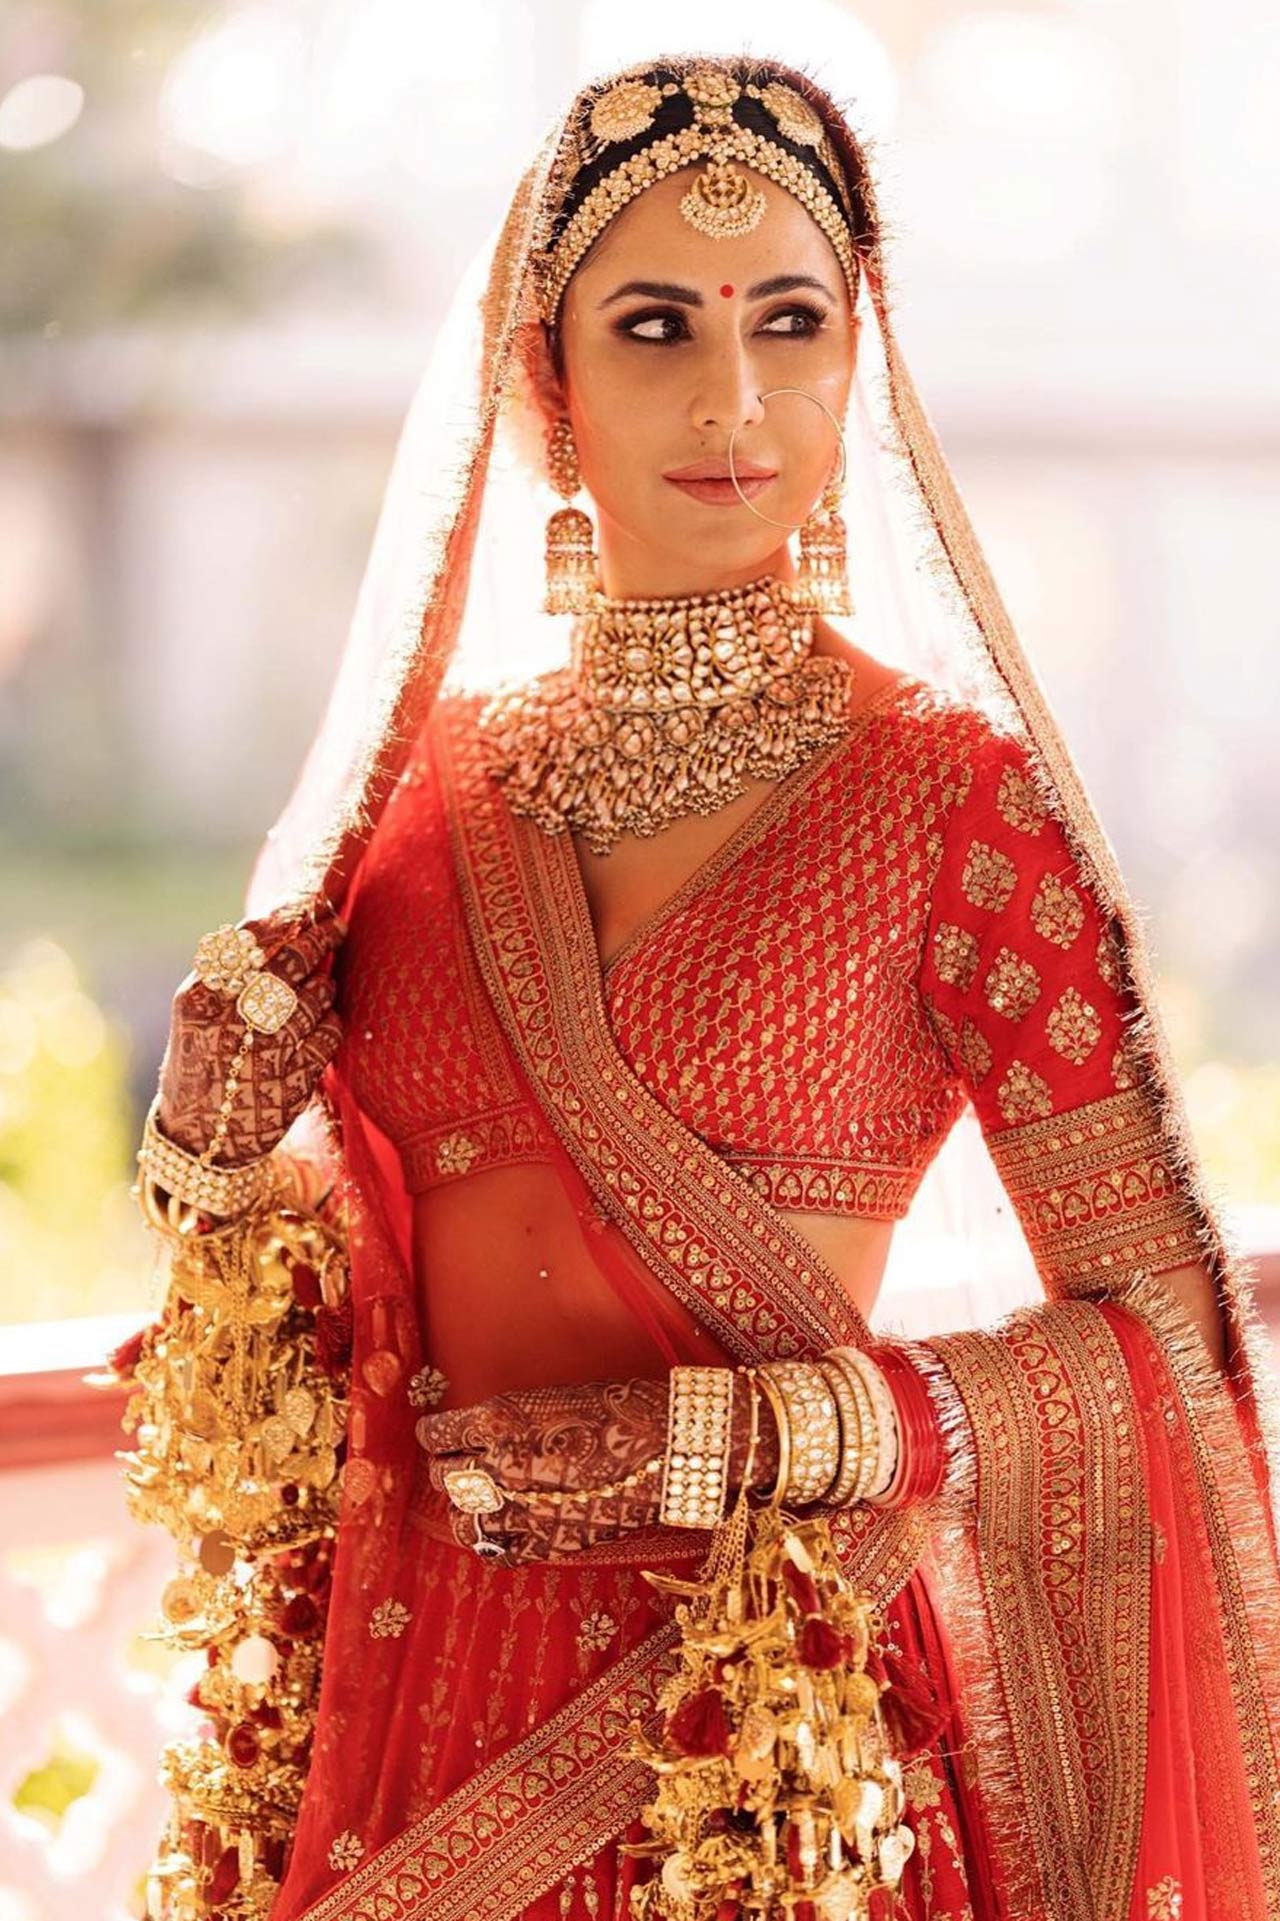 Katrina Kaif walked down the aisle looking breathtakingly beautiful. She looks no less than a royal princess on her wedding day, and we can't get over her red lehenga she opted for the ceremony.